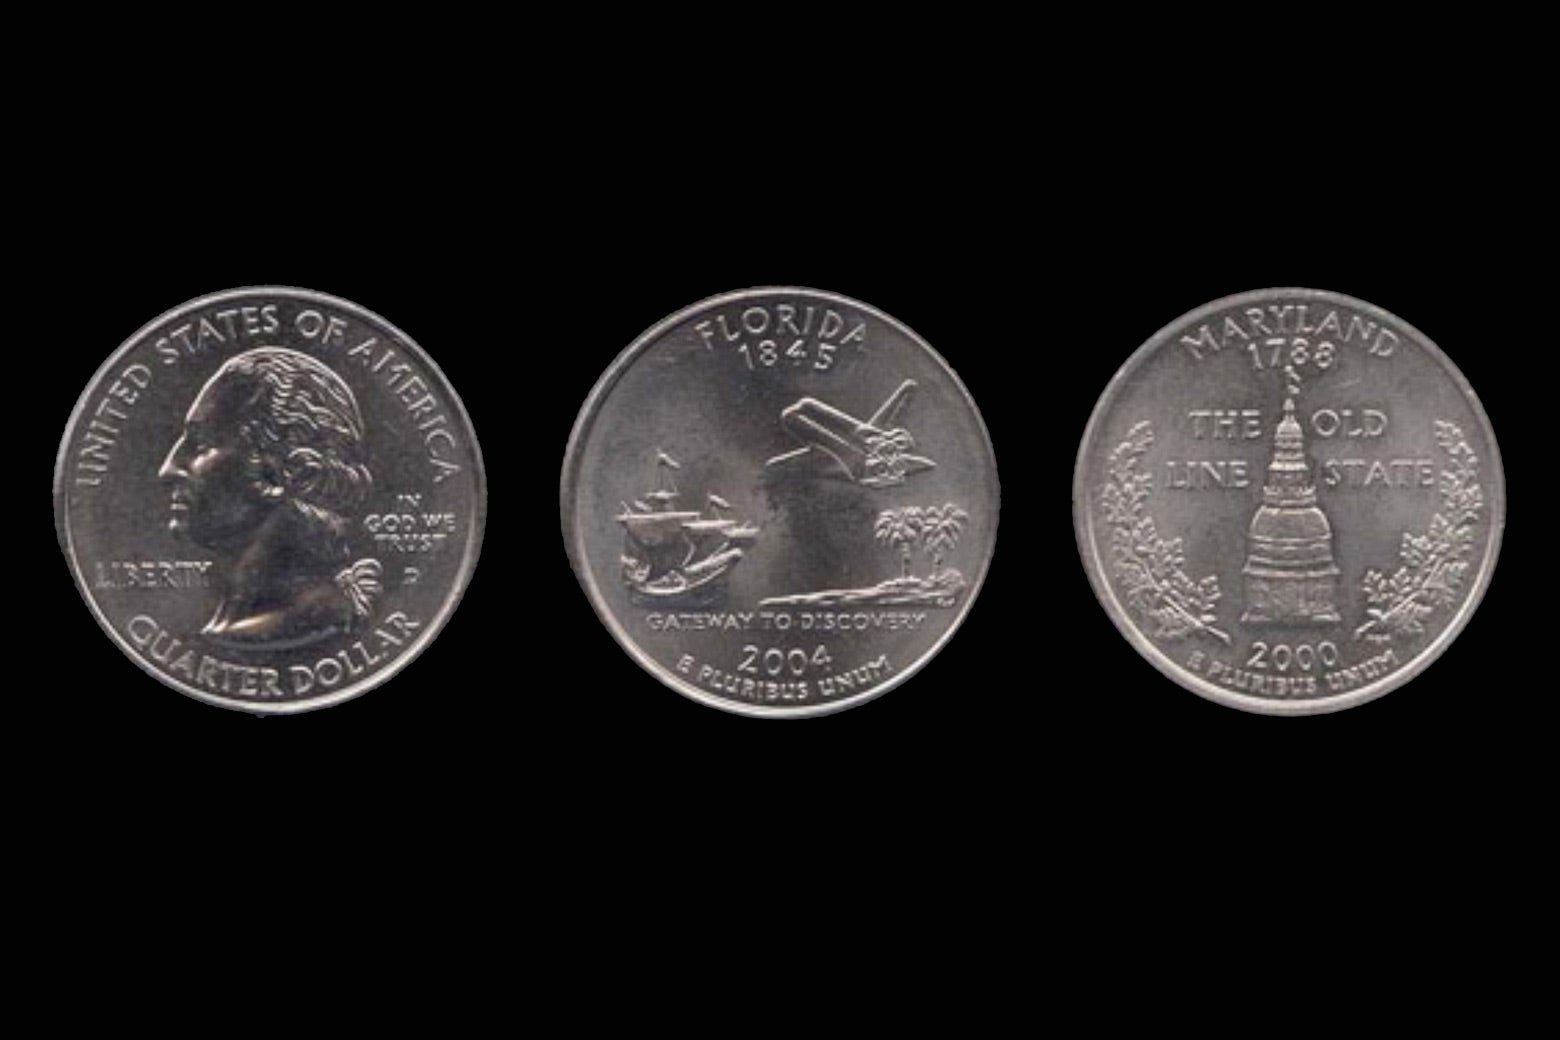 Two U.S. state quarters included as cargo on New Horizons.